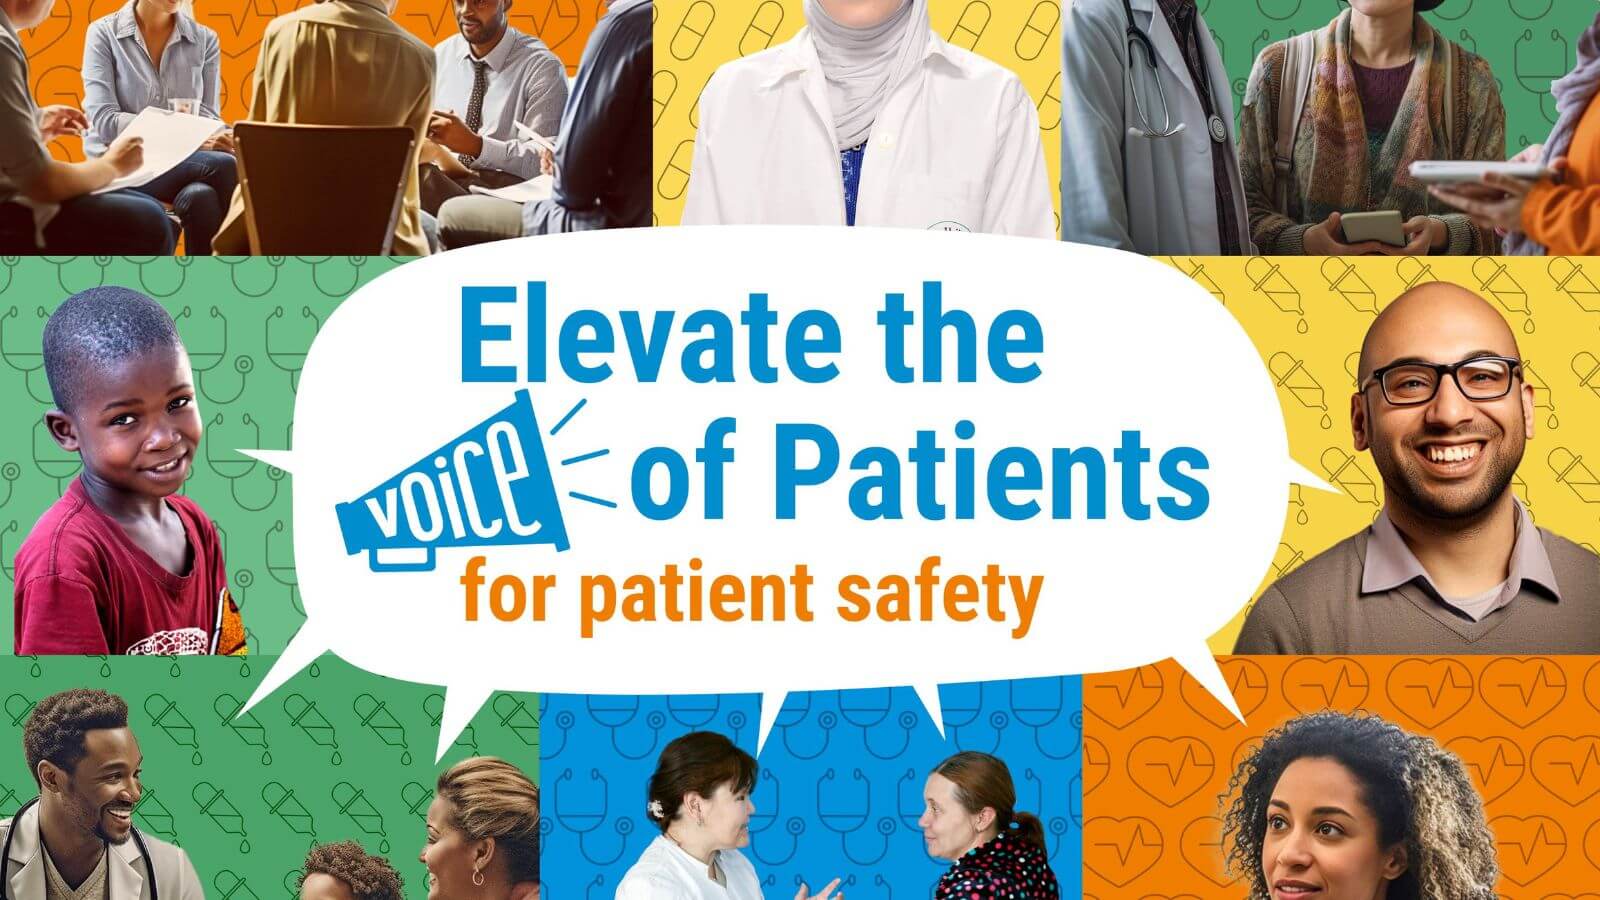 World Patient Safety Day 2023